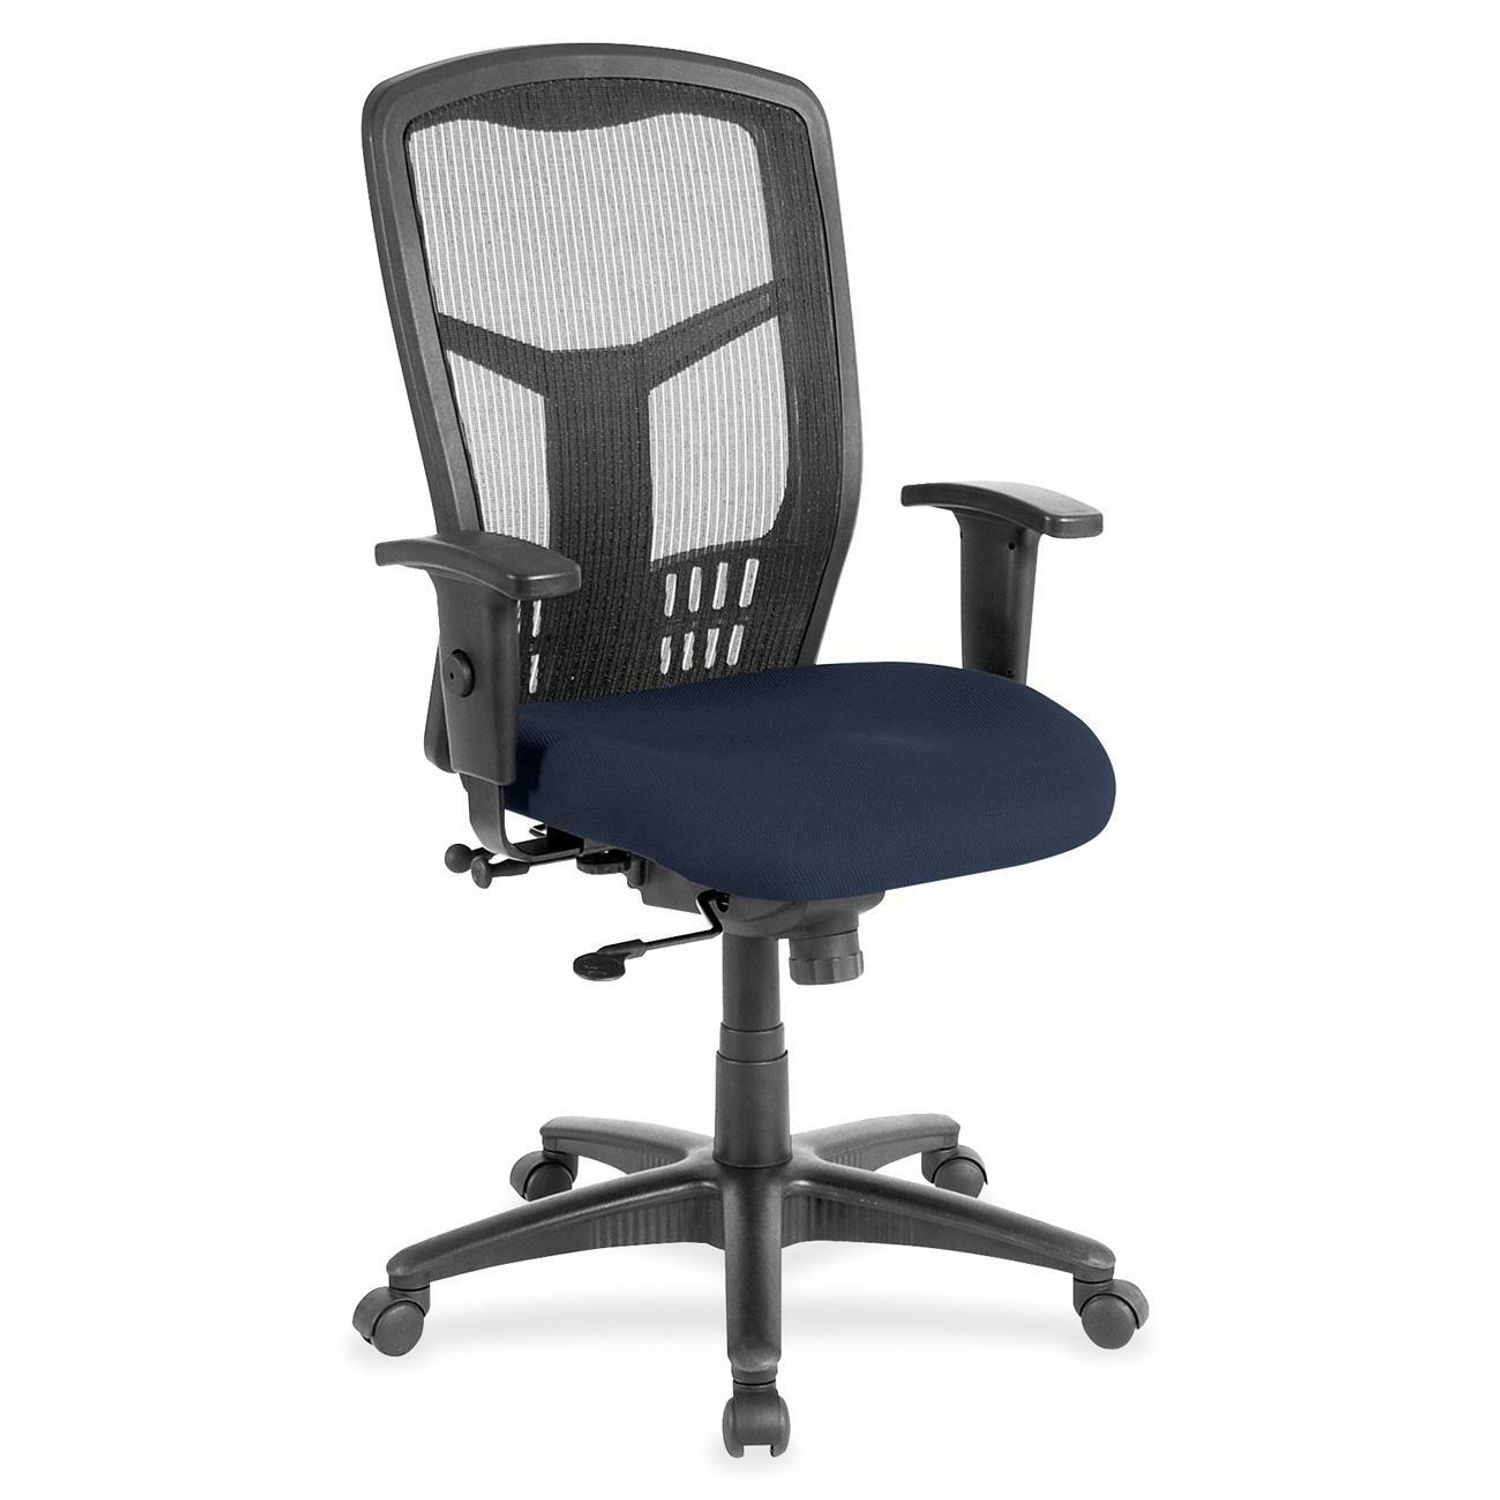 High-Back Executive Chair Forte Cadet Fabric Seat, Steel Frame, 1 Each